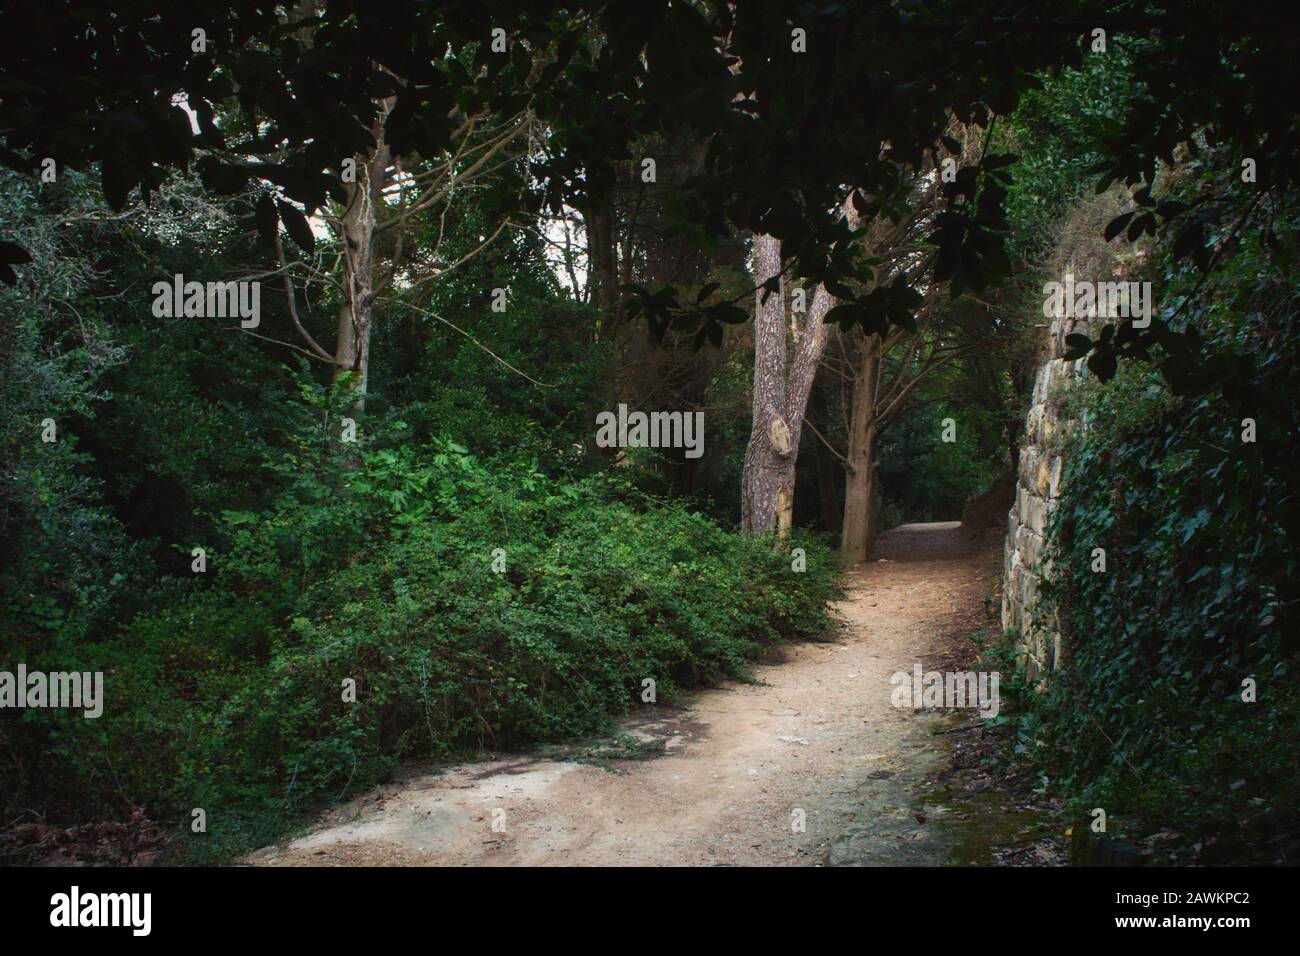 Footpath leading through the forest in dense vegetation Stock Photo